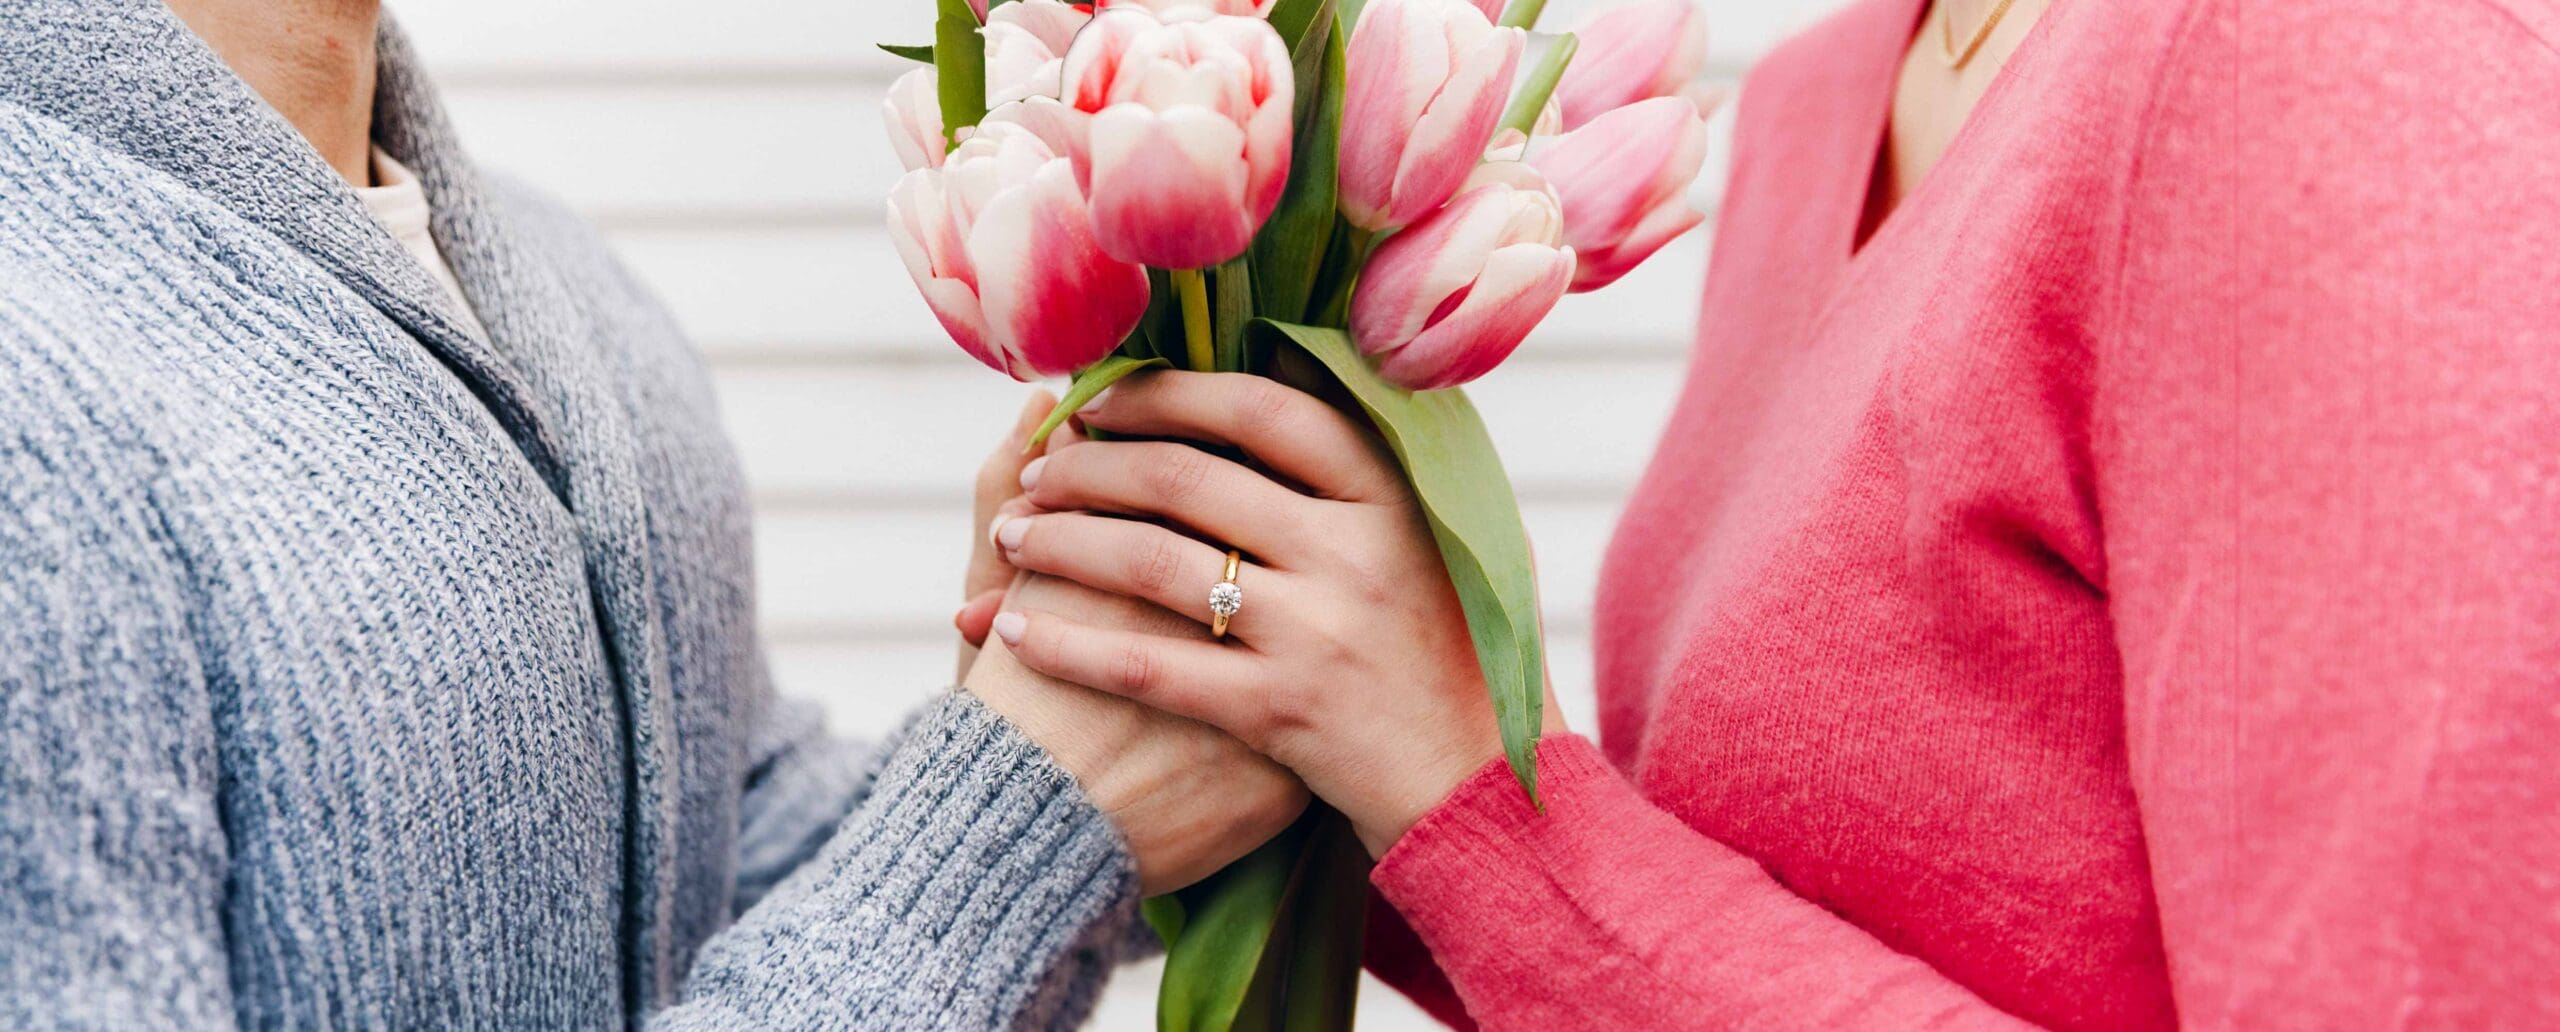 Spring Engagement man and women hands holding tulip bunch with a diamond classic yellow gold engagement ring on her left ring finger